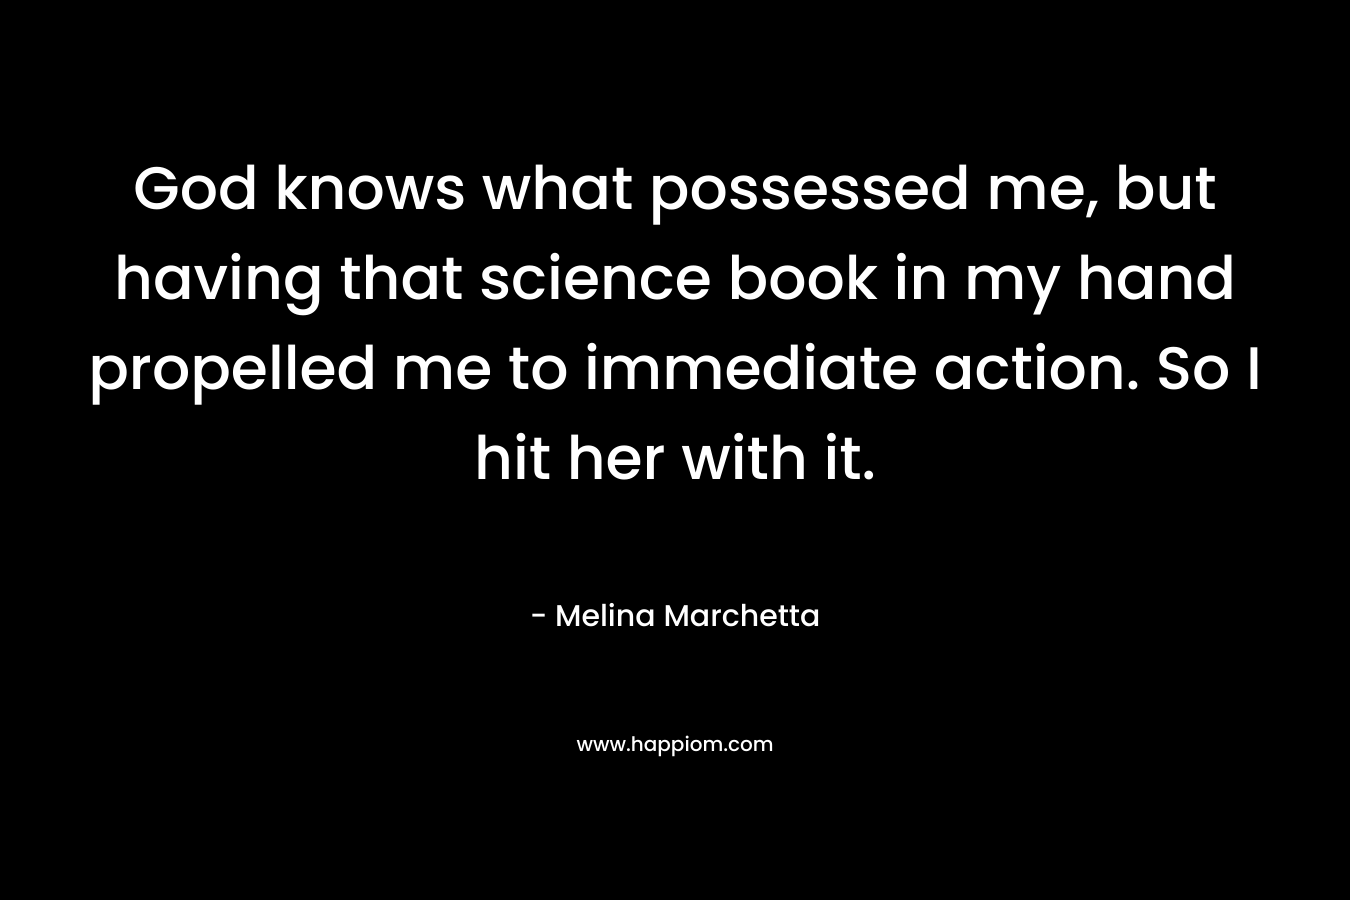 God knows what possessed me, but having that science book in my hand propelled me to immediate action. So I hit her with it. – Melina Marchetta